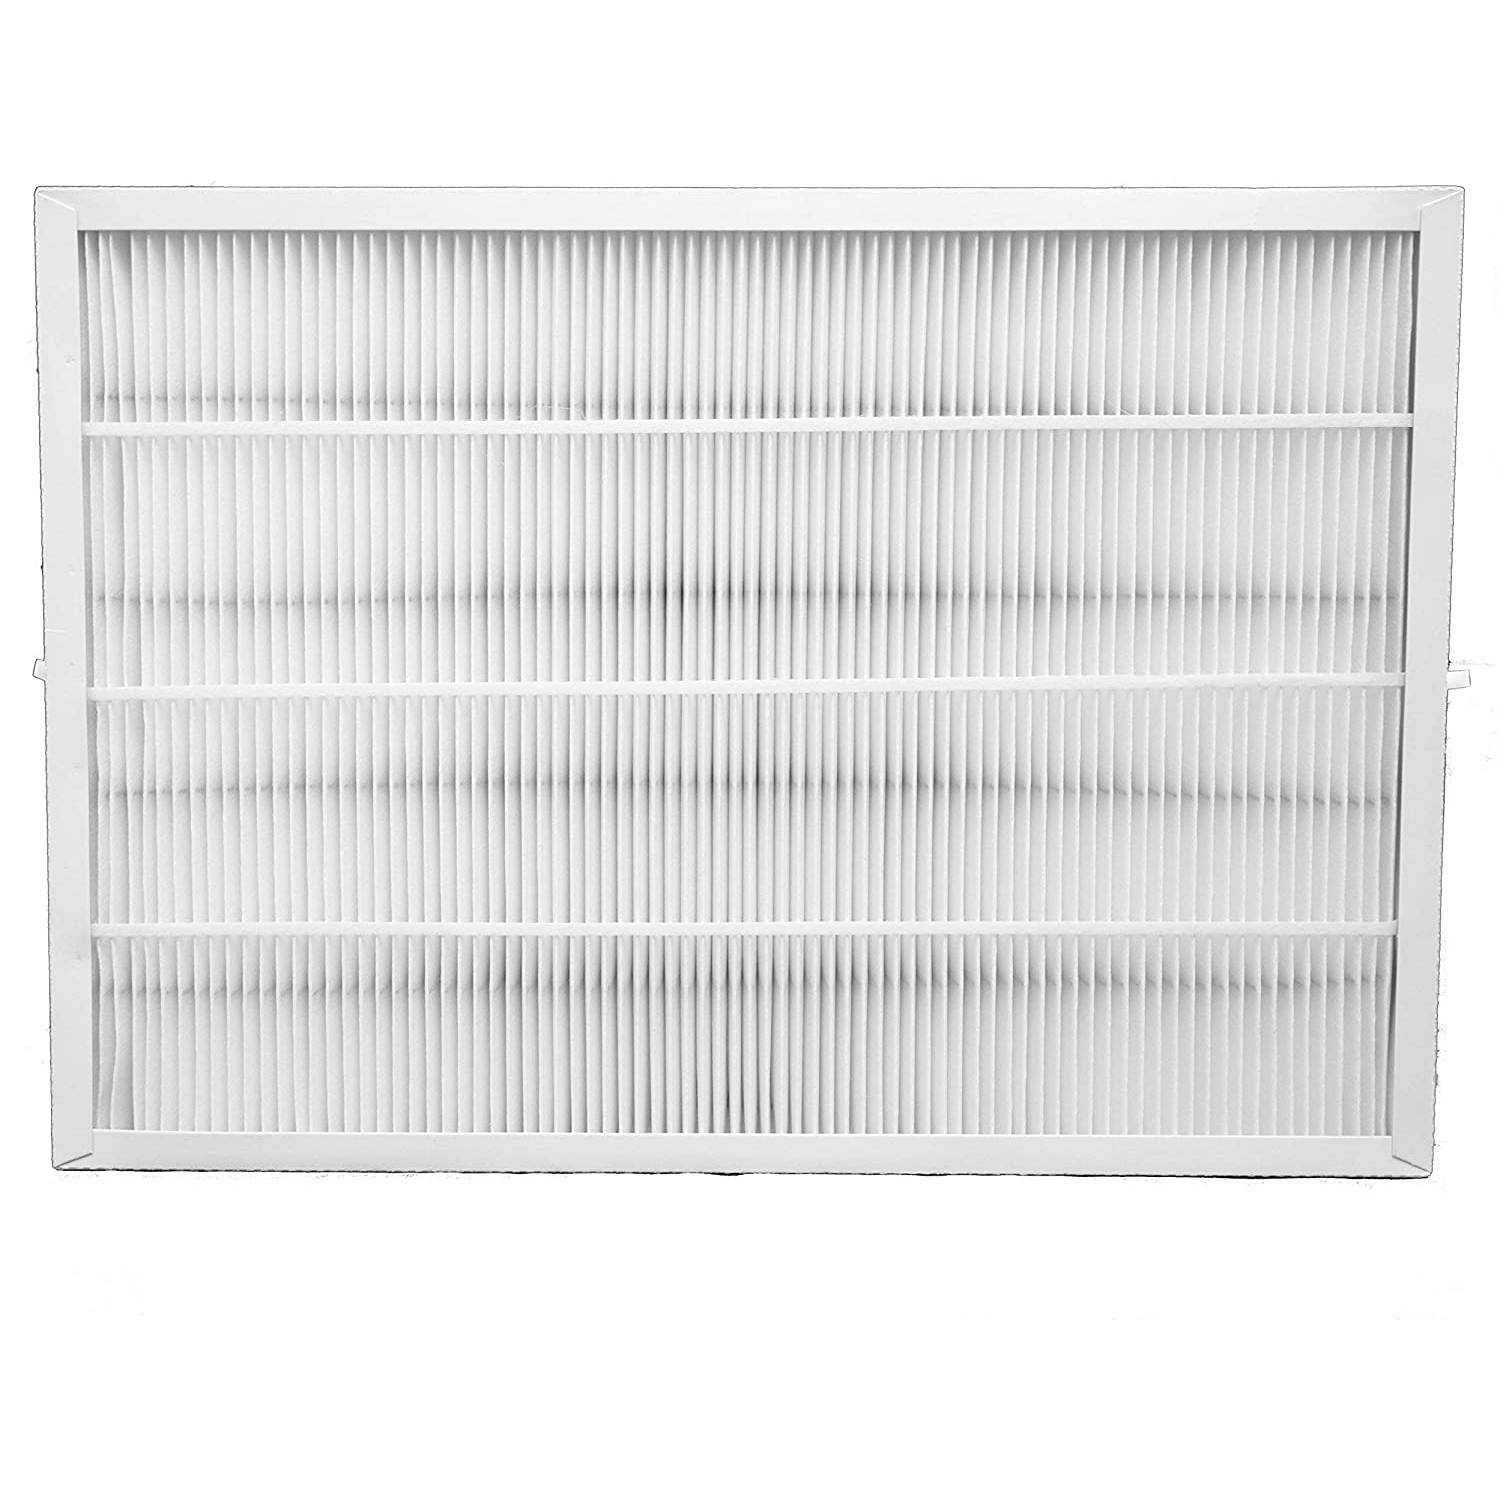 Filters Fast® Replacement for Carrier GAPCCCAR1625 17x25x3.5 MERV 15 Furnace & AC Air Filter